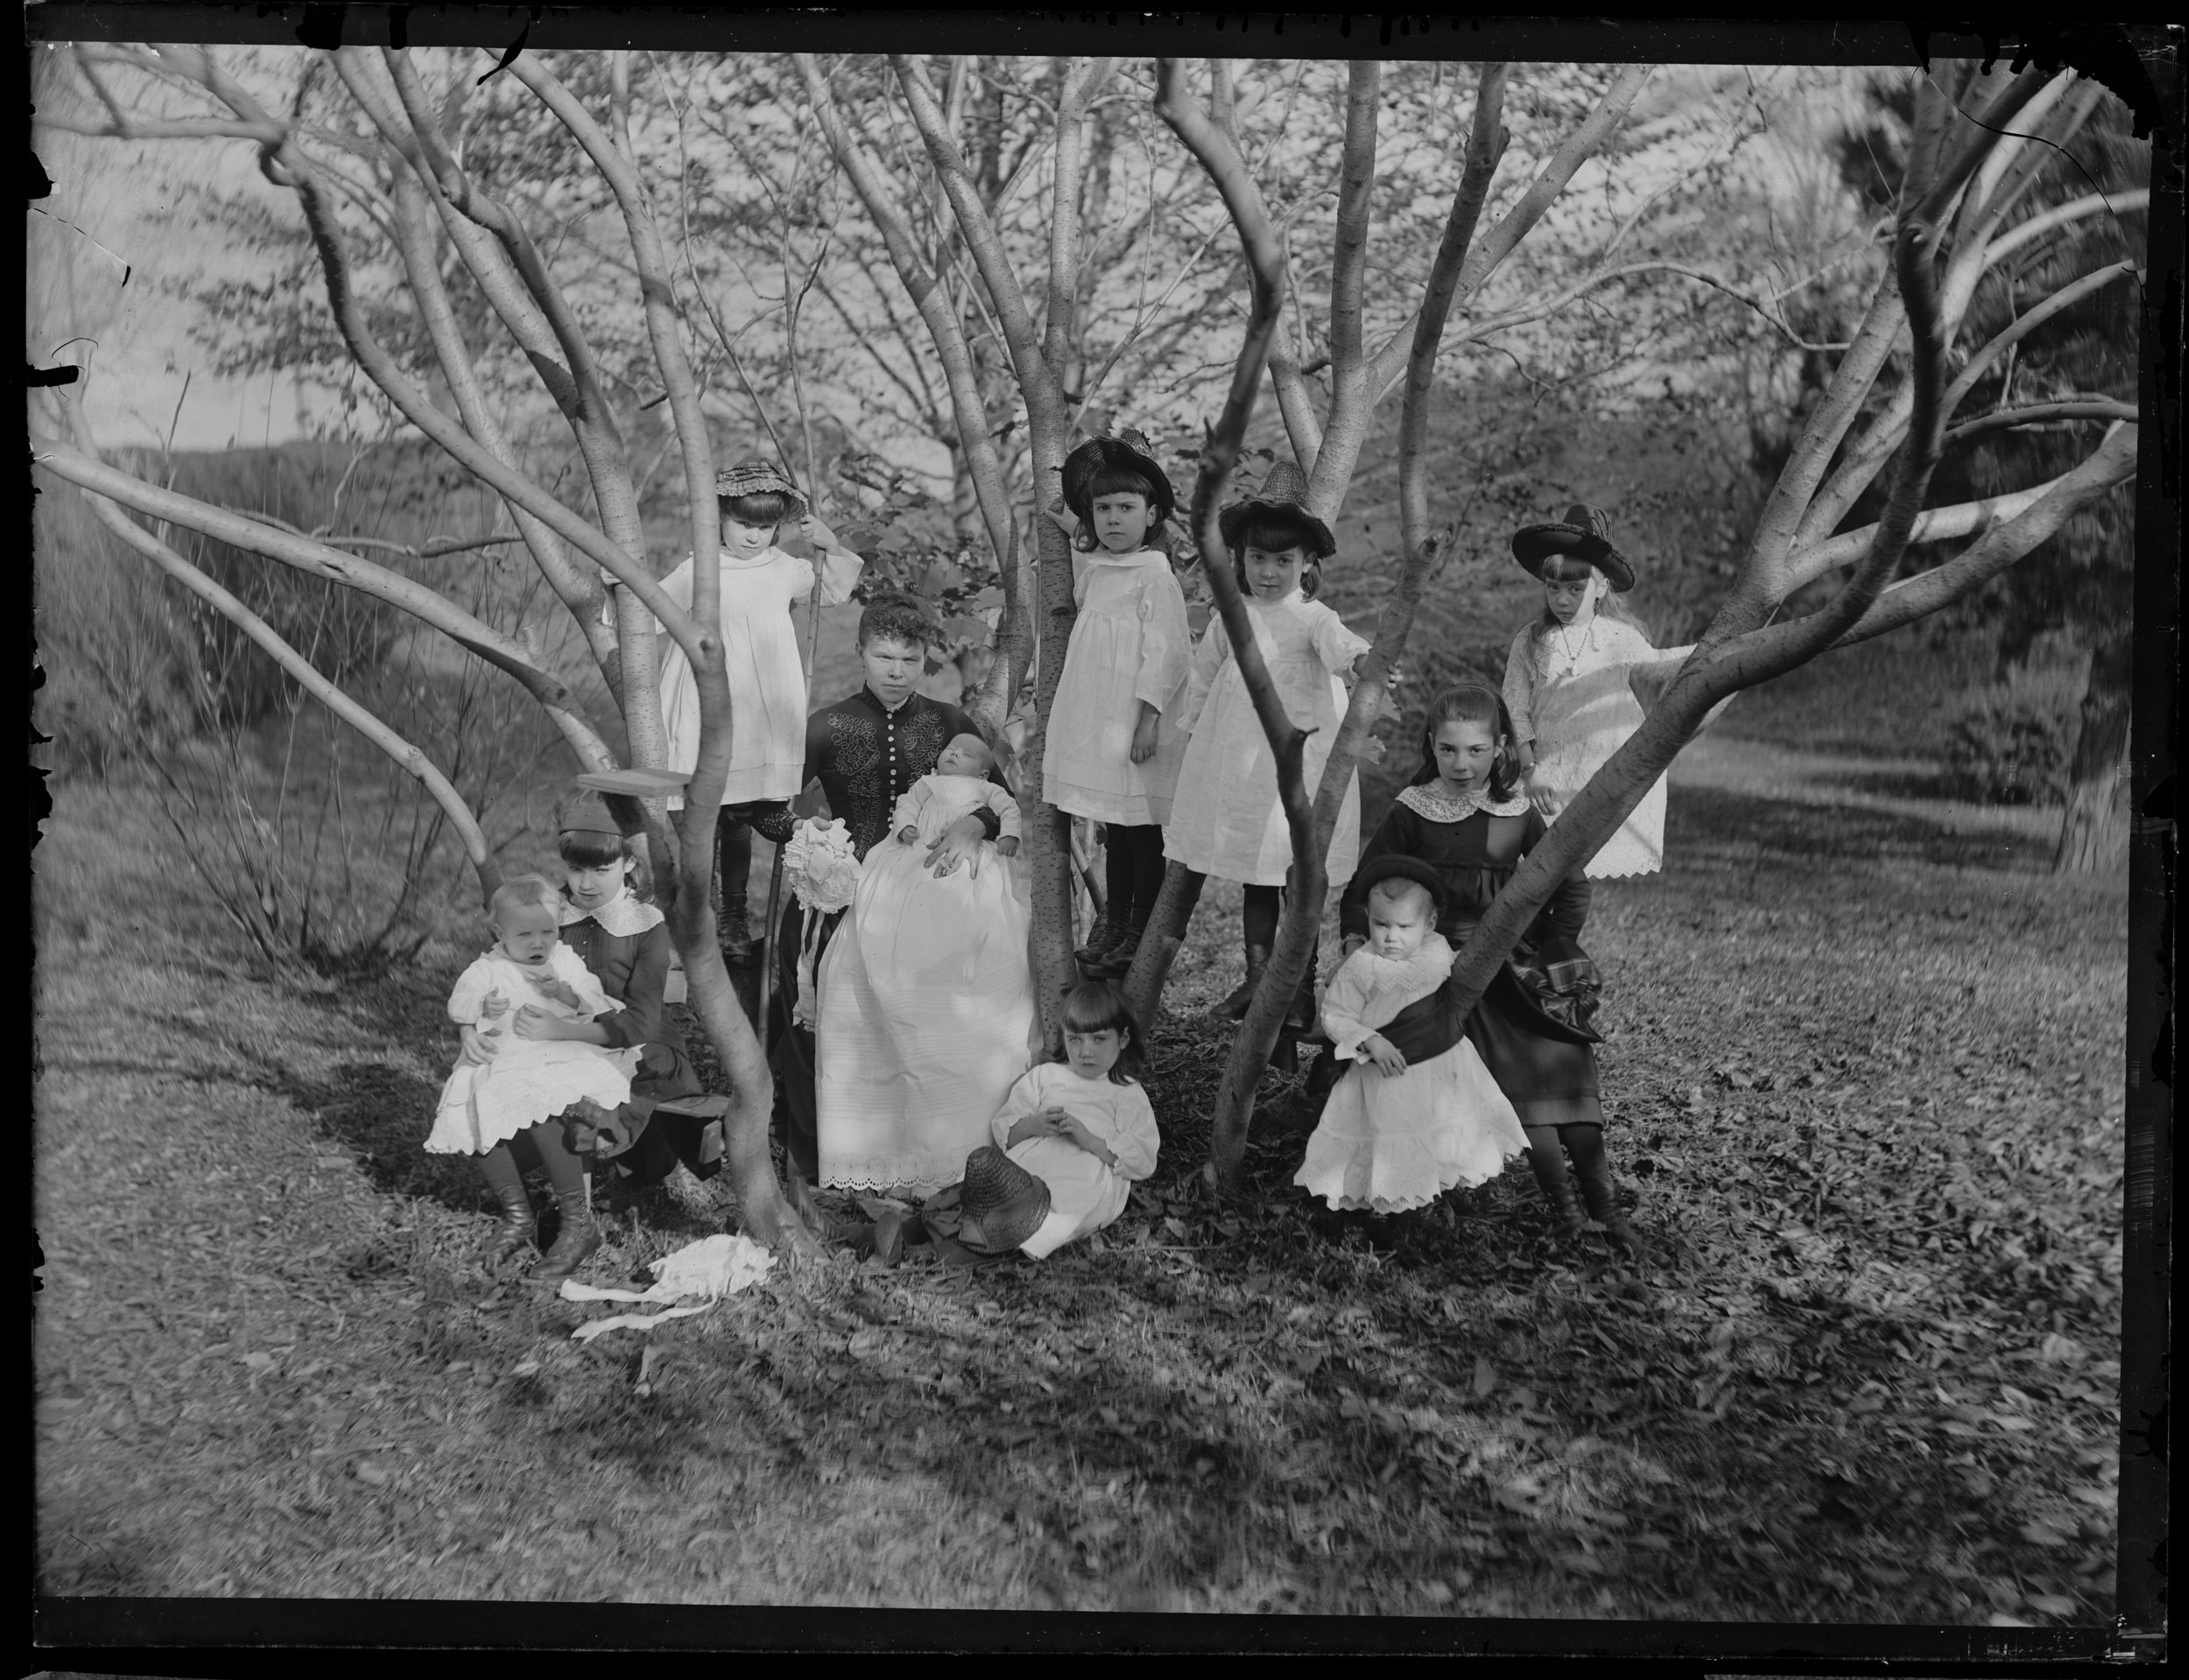 Cocroft children in the trees, Clear Comfort, November 2, 1886